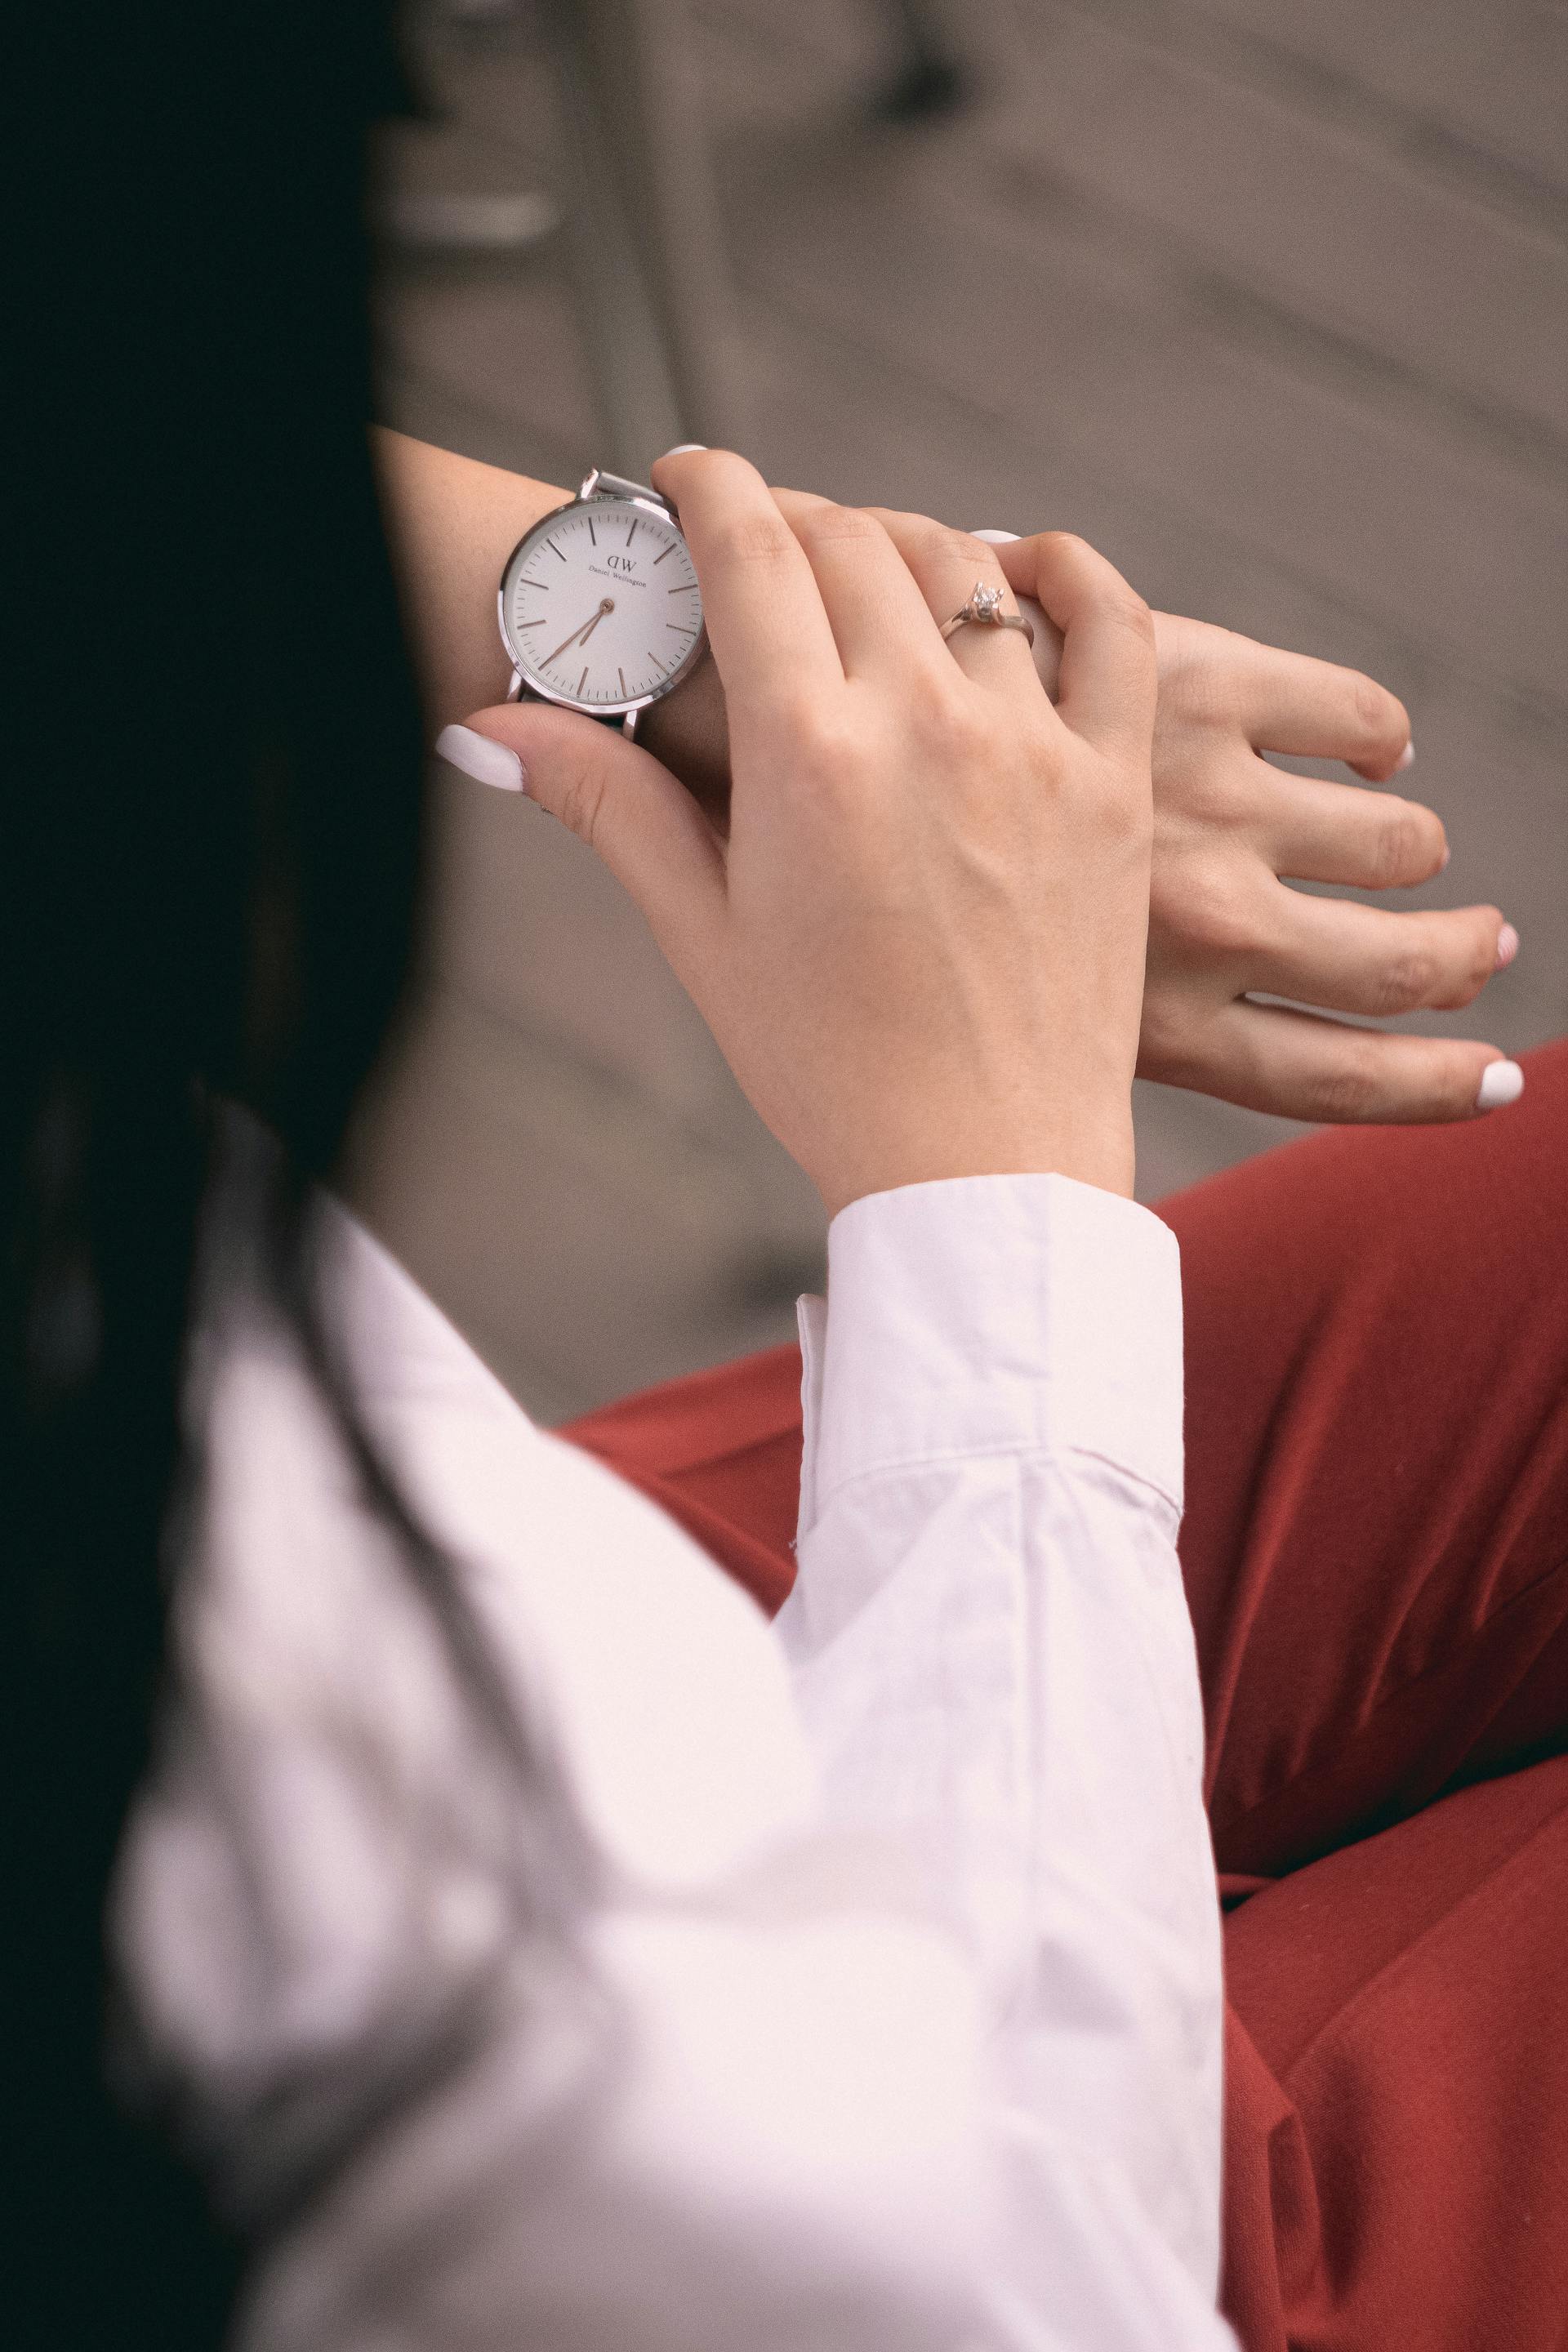 Woman looking at her watch | Source: Pexels